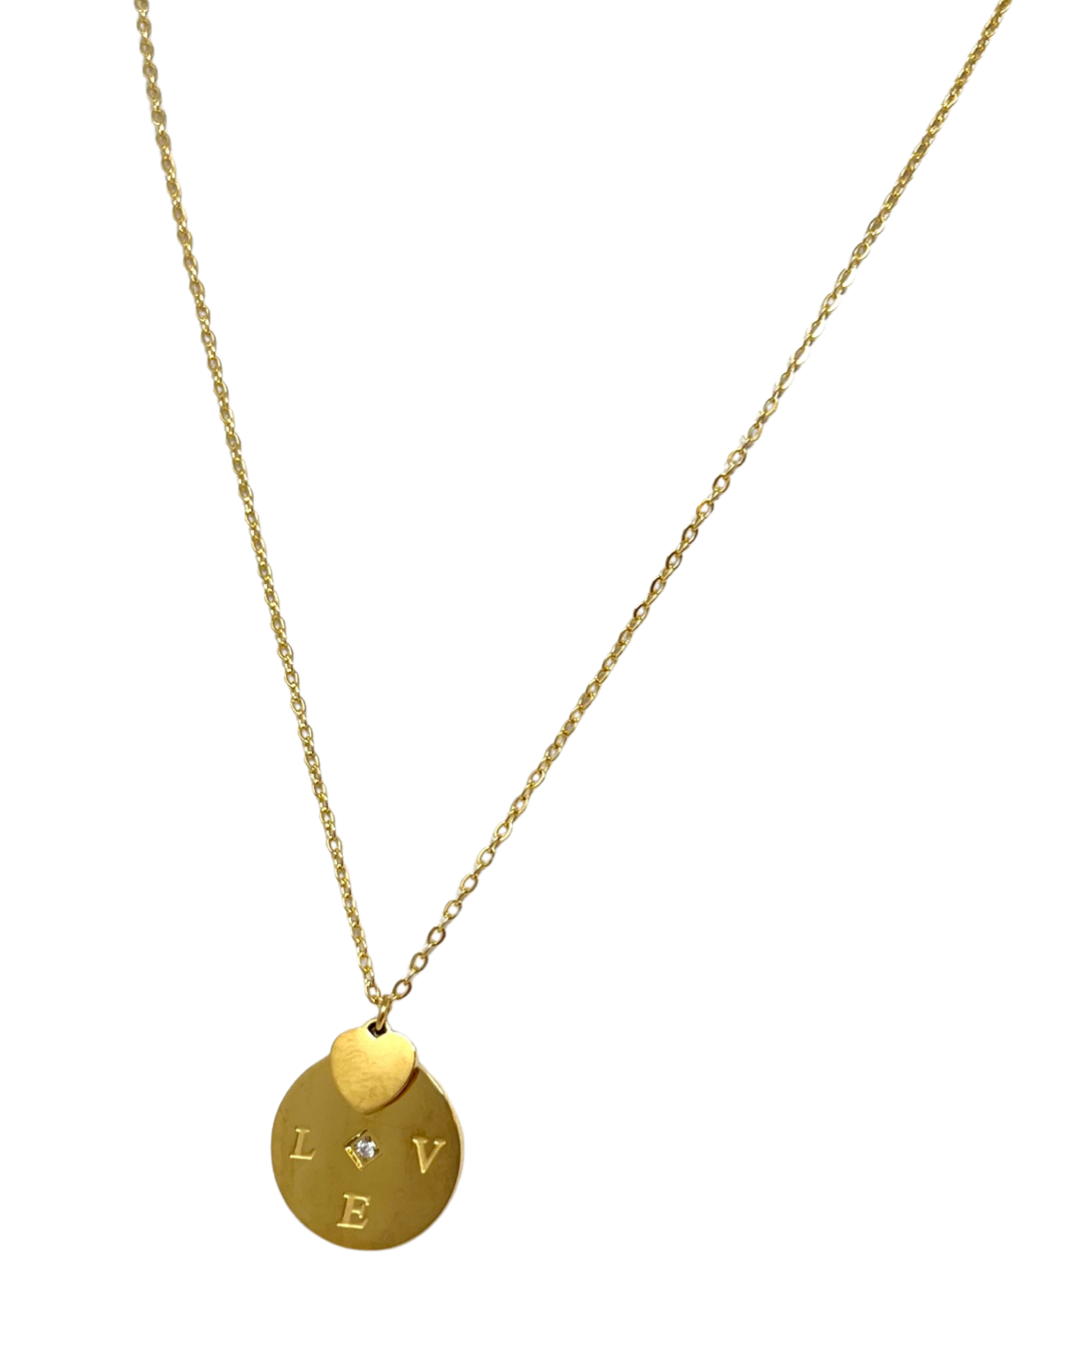 LOVE Coin Necklace